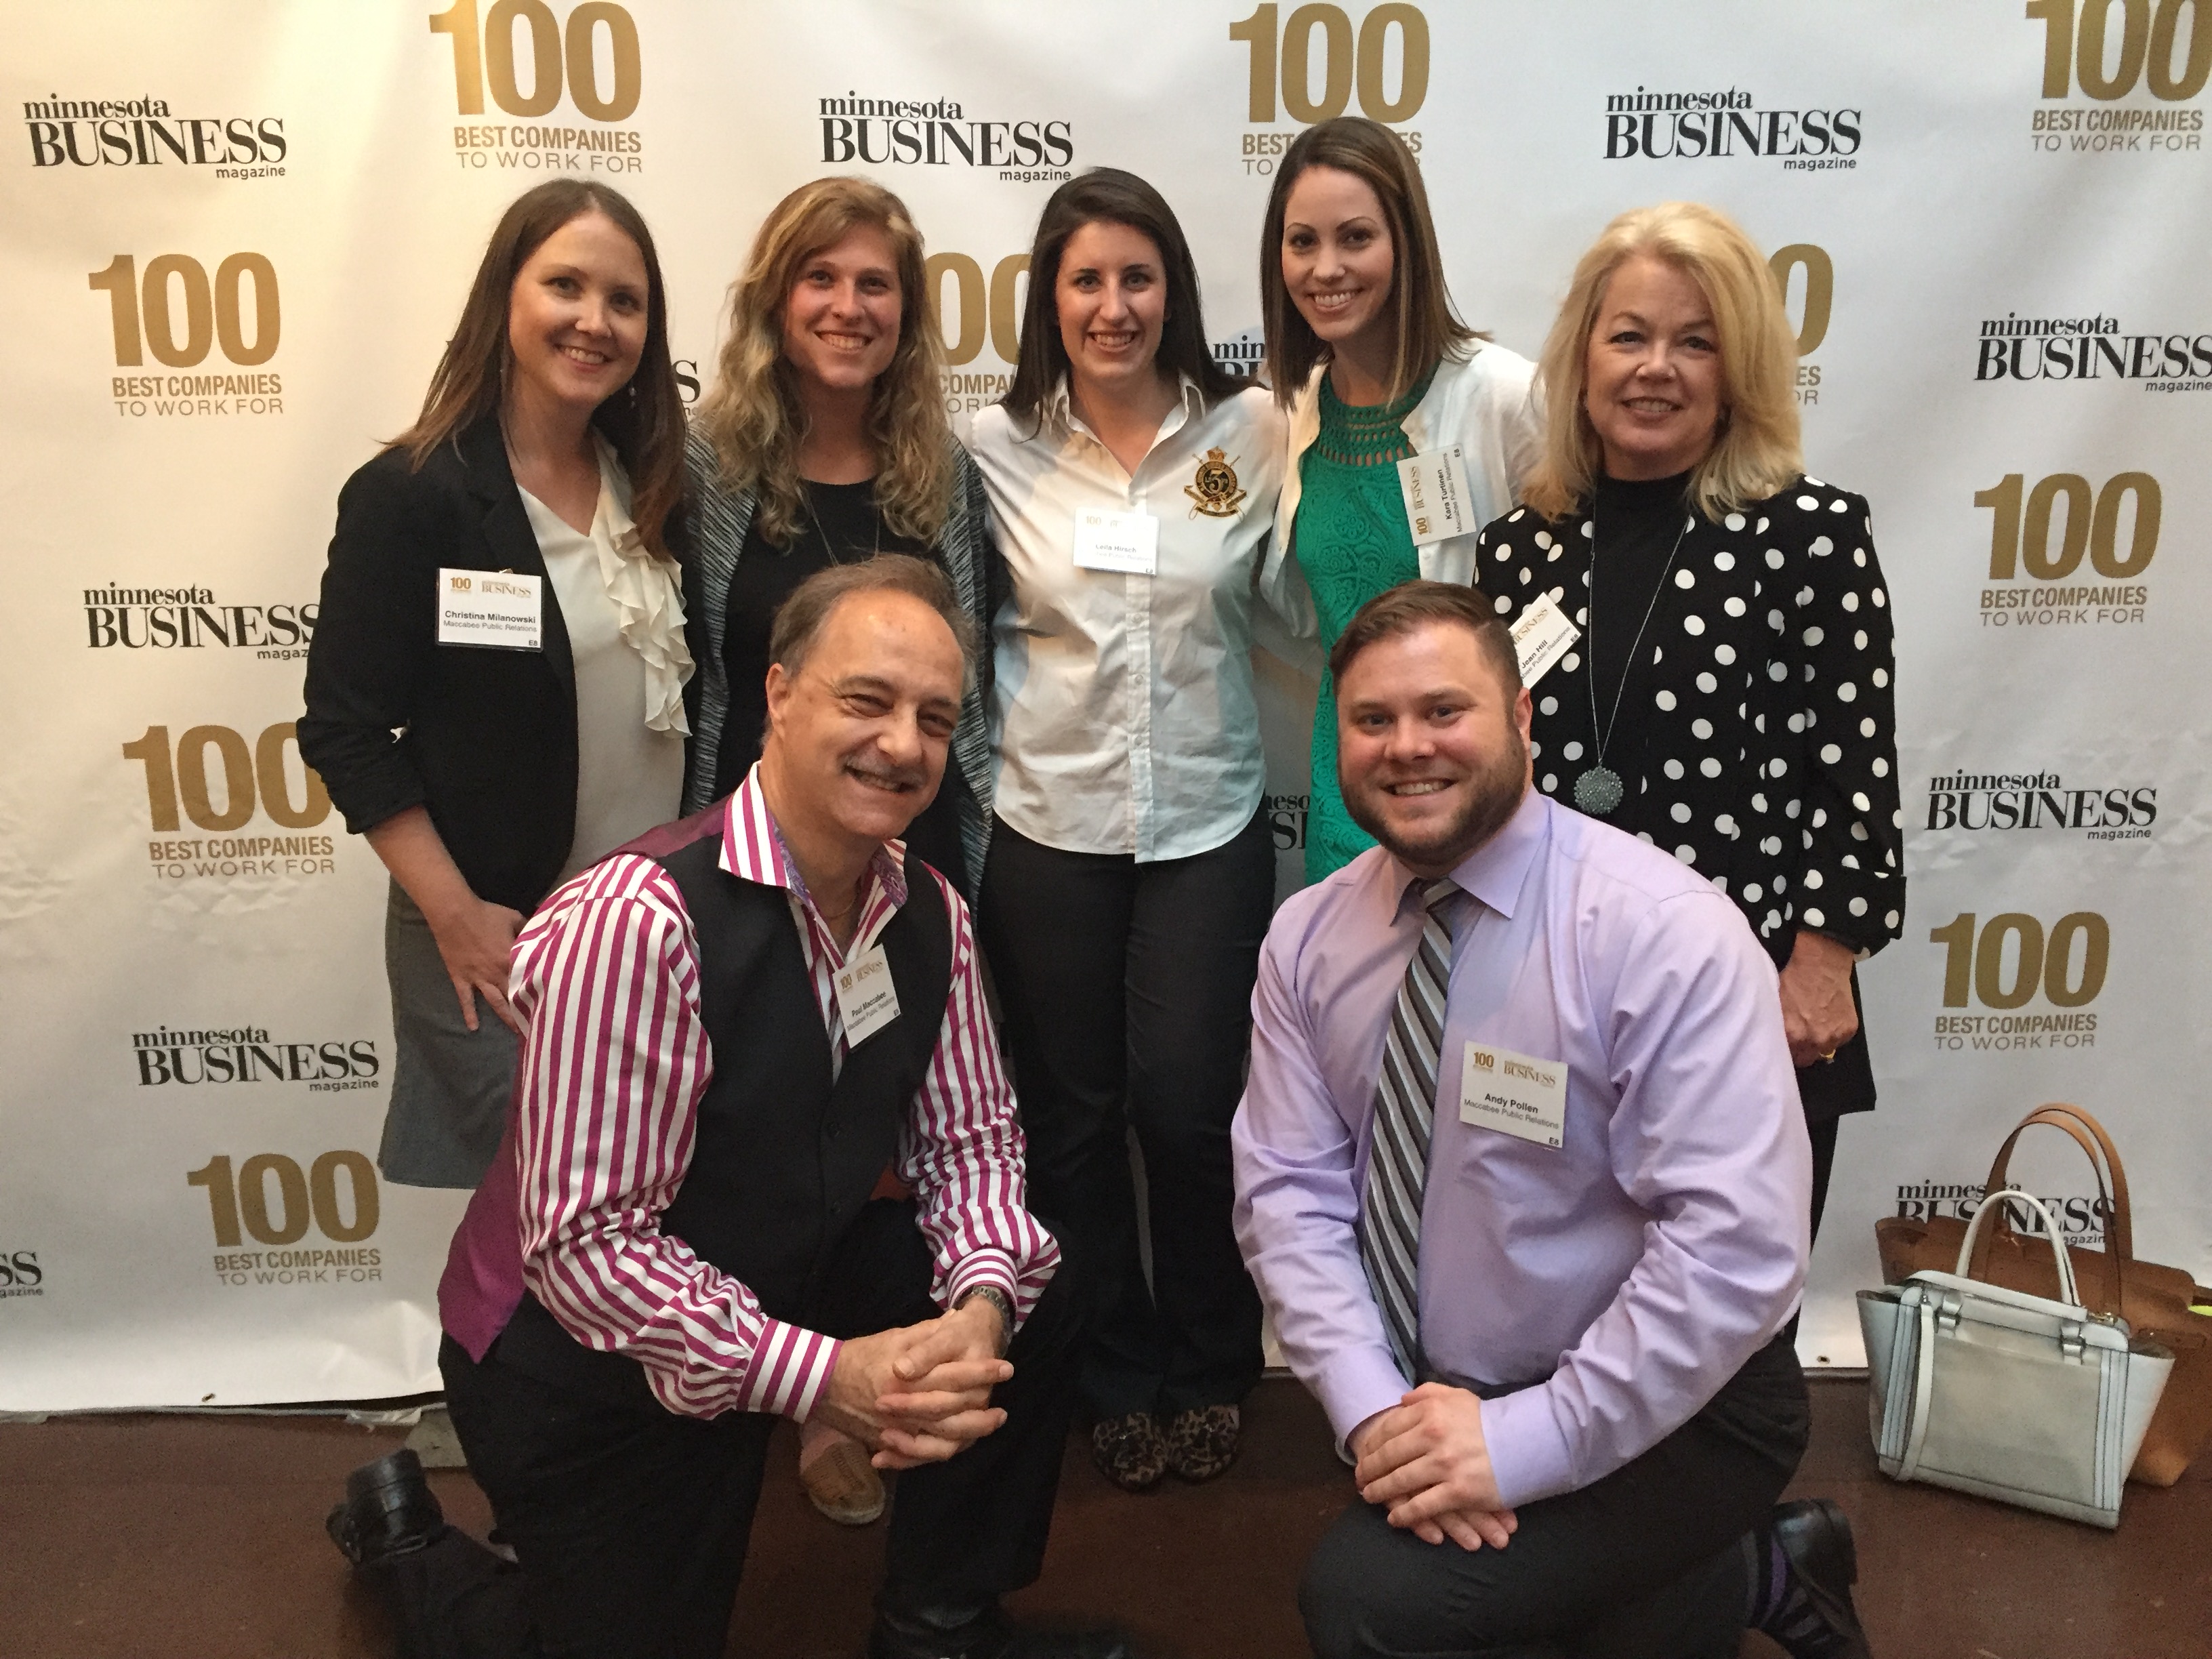 Maccabee Public Relations was named one of the “100 Best Companies To Work For” in Minnesota by Minnesota Business magazine.